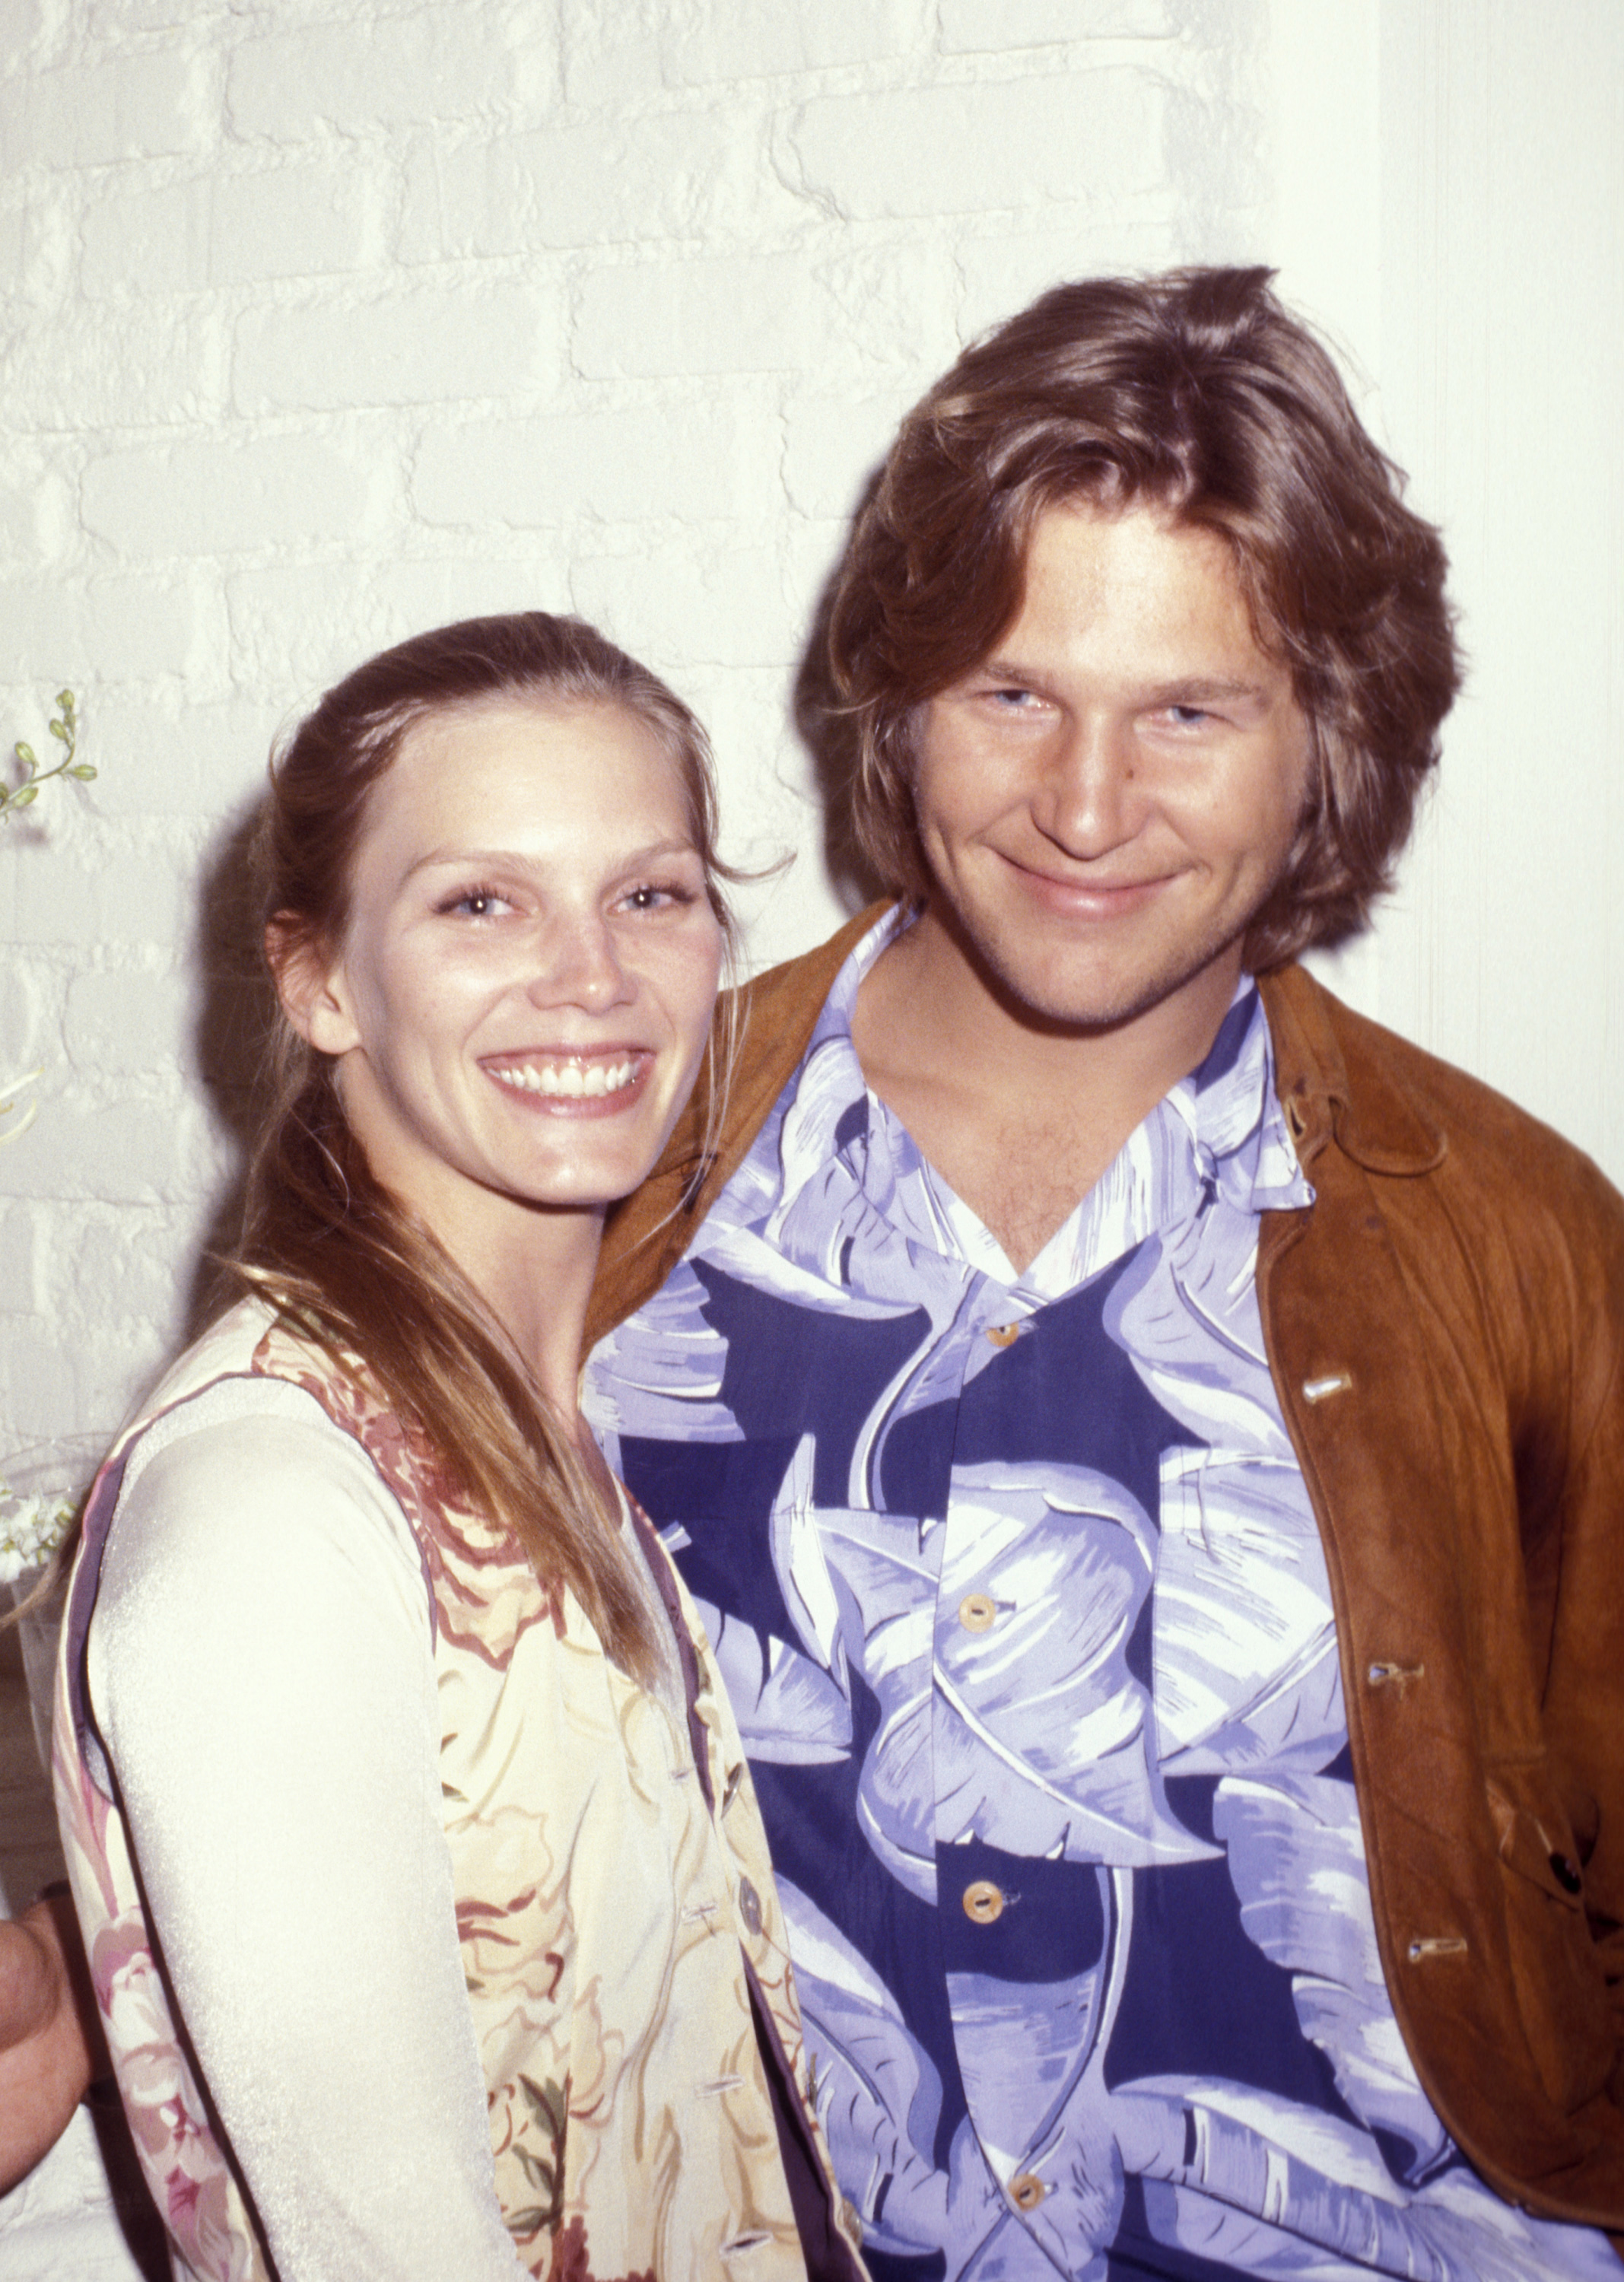 Susan and Jeff Bridges photographed in 1977 | Source: Getty Images